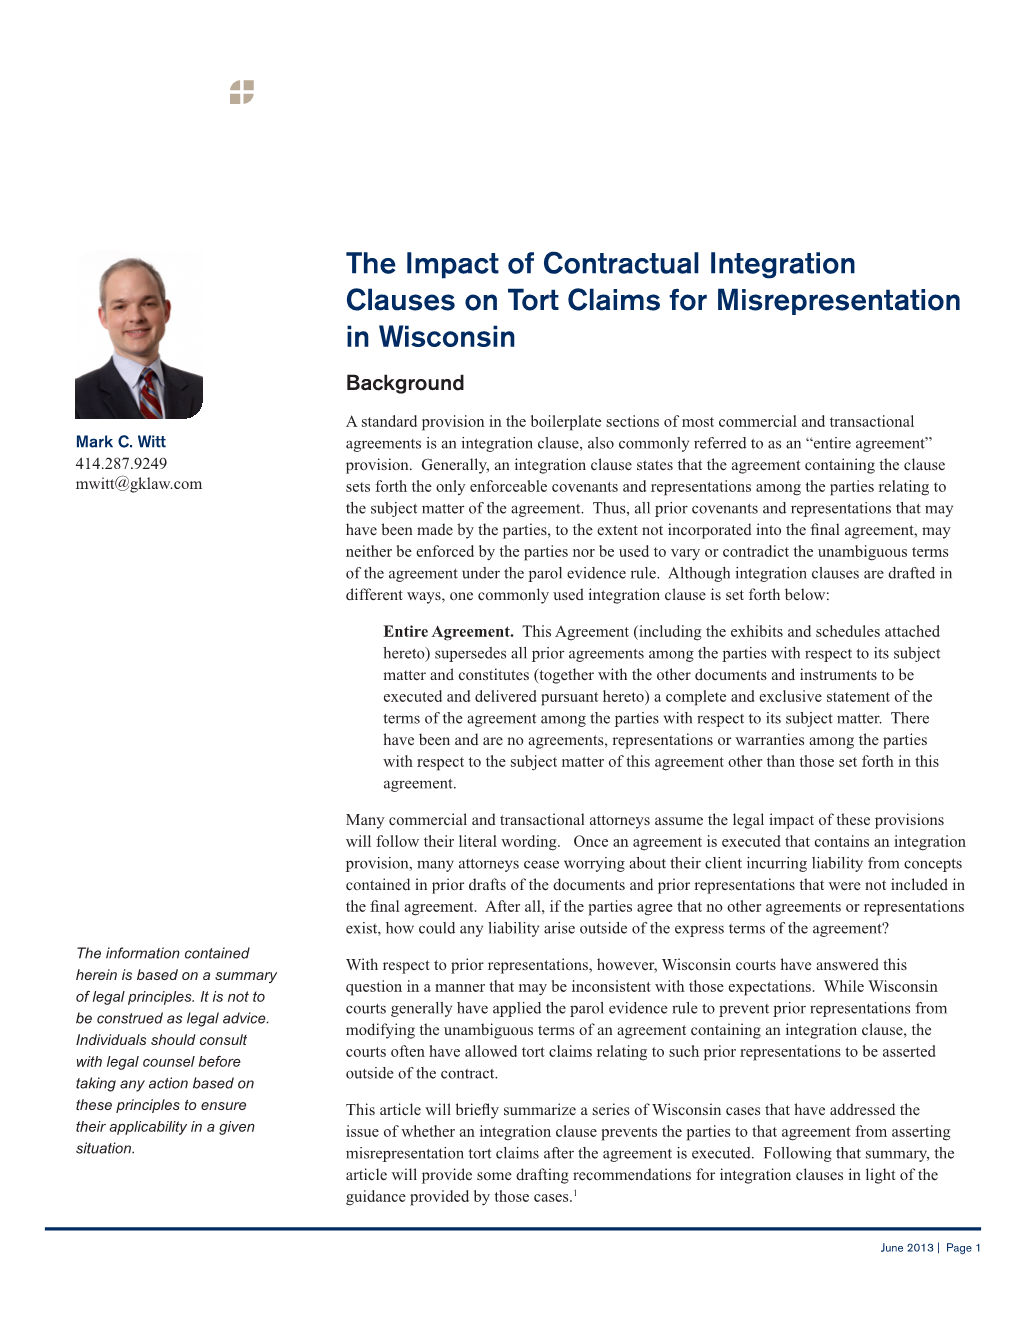 The Impact of Contractual Integration Clauses on Tort Claims for Misrepresentation in Wisconsin Background